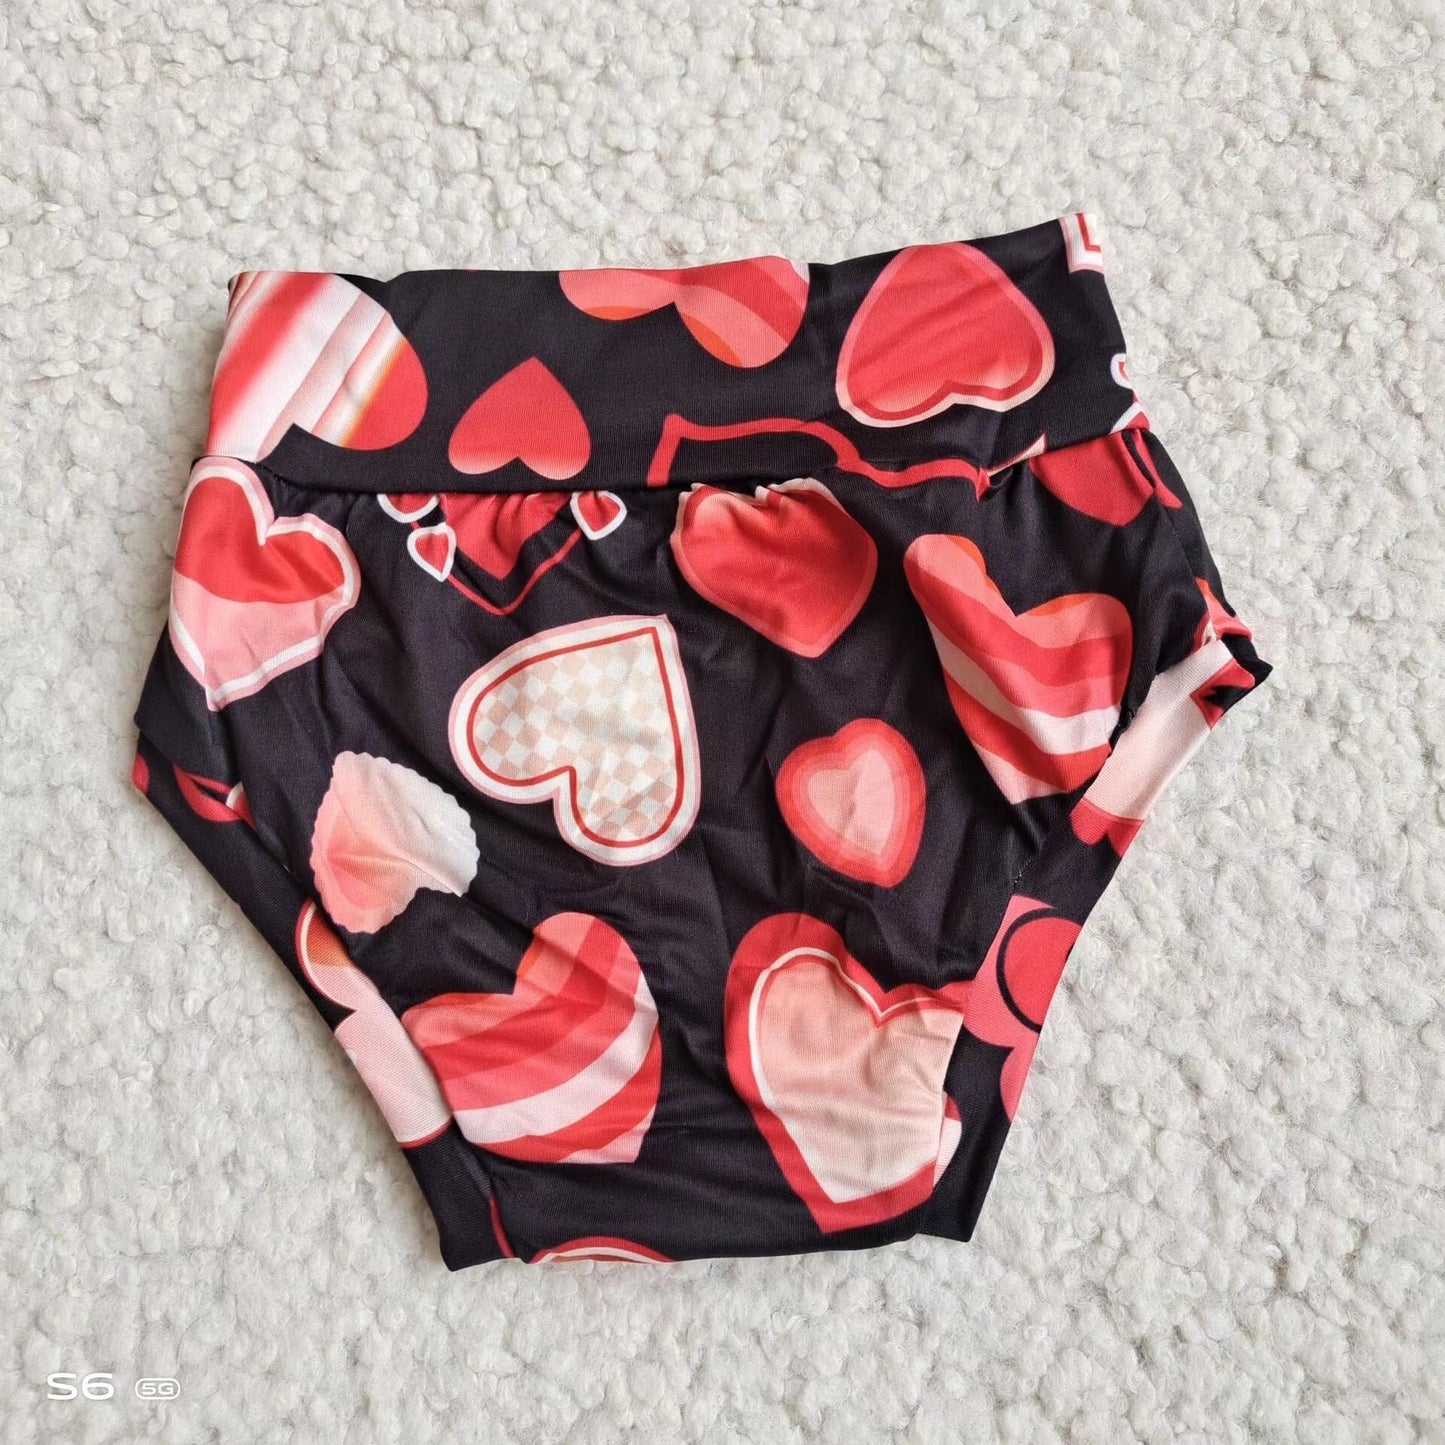 Baby Girls red heart bummies bloomers